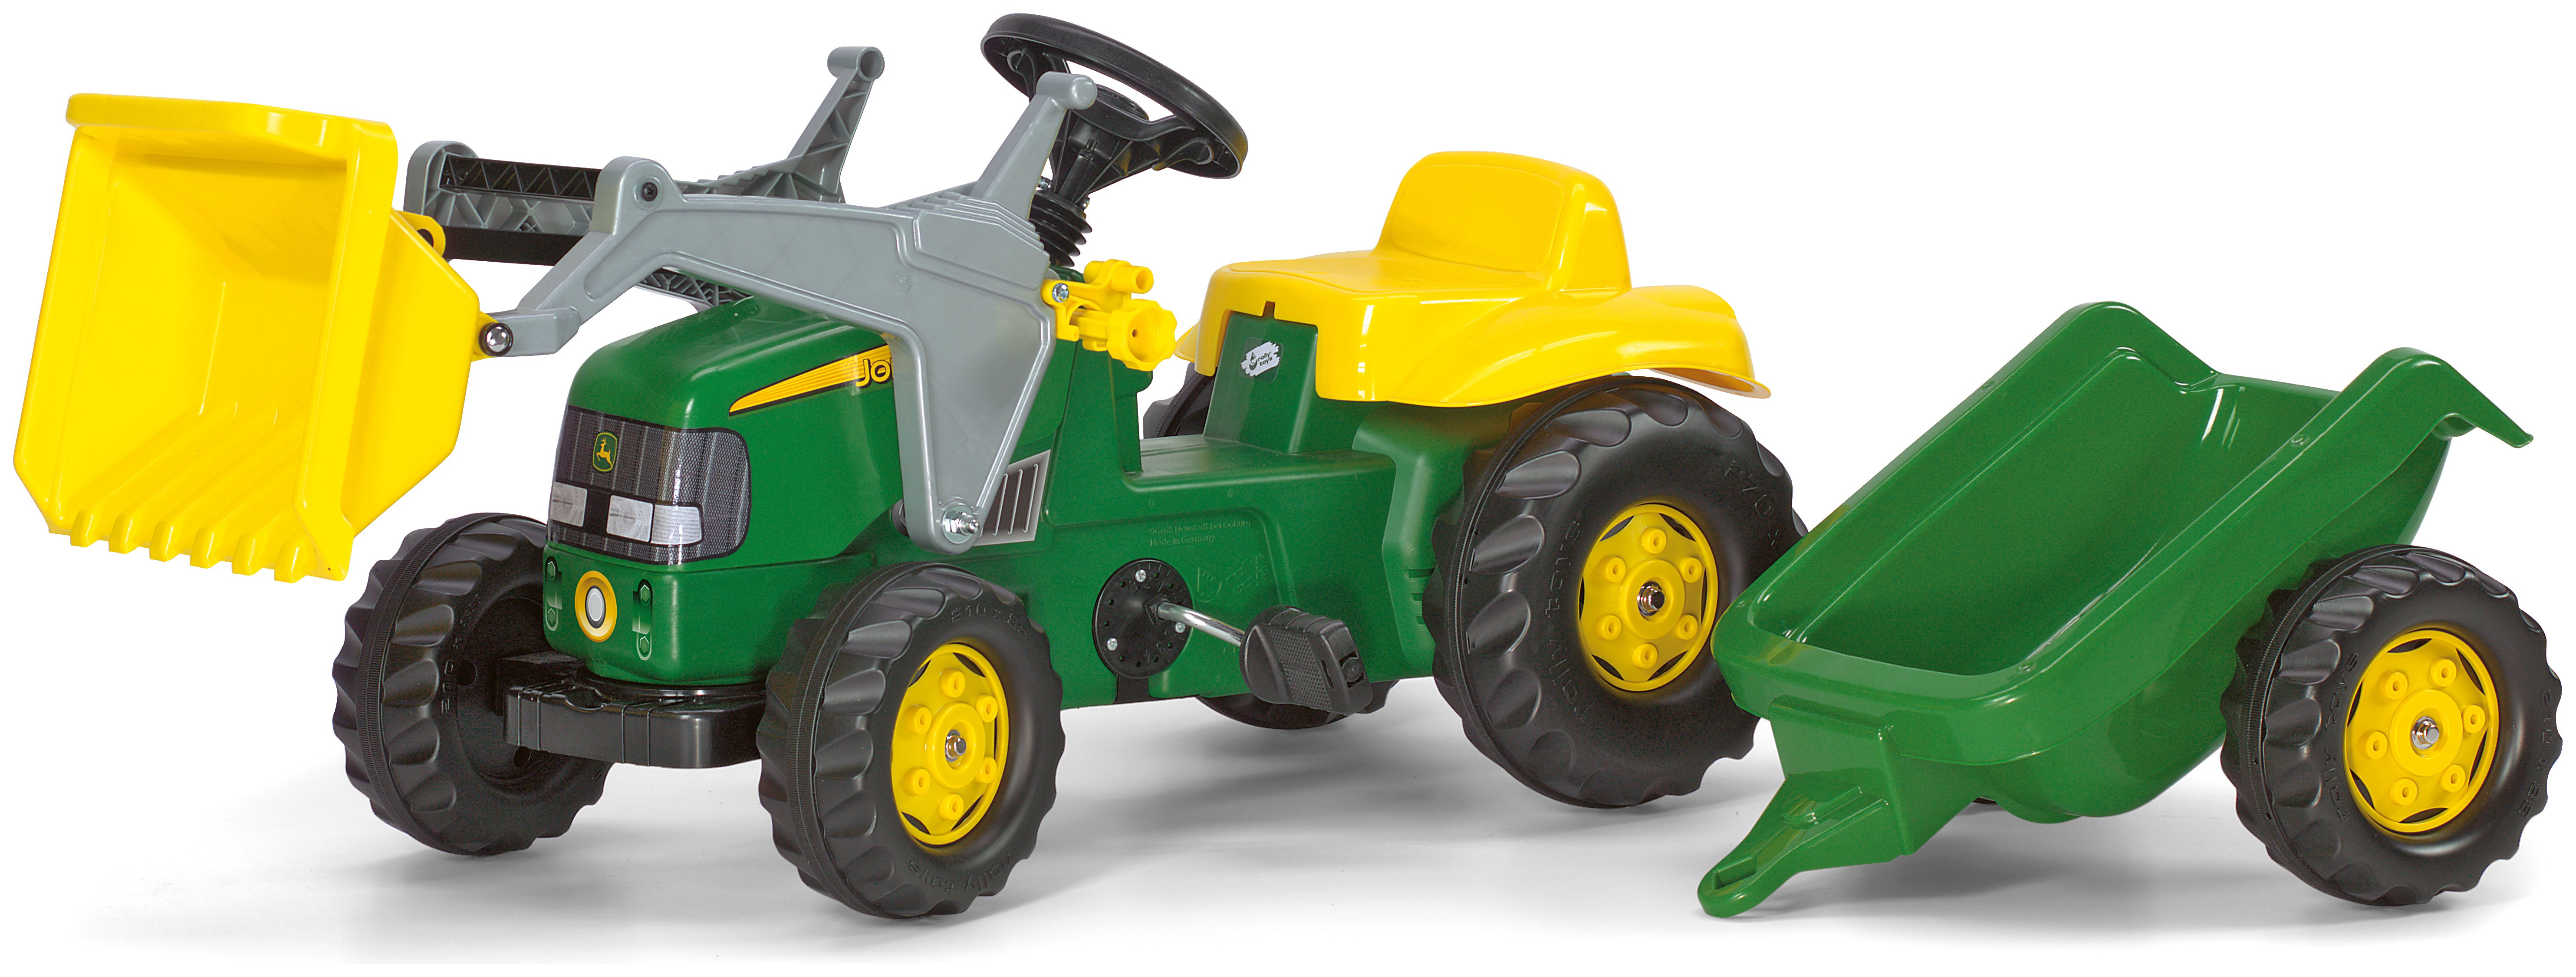 Rolly Kids John Deere Frontloader Tractor Trailer Ride On review